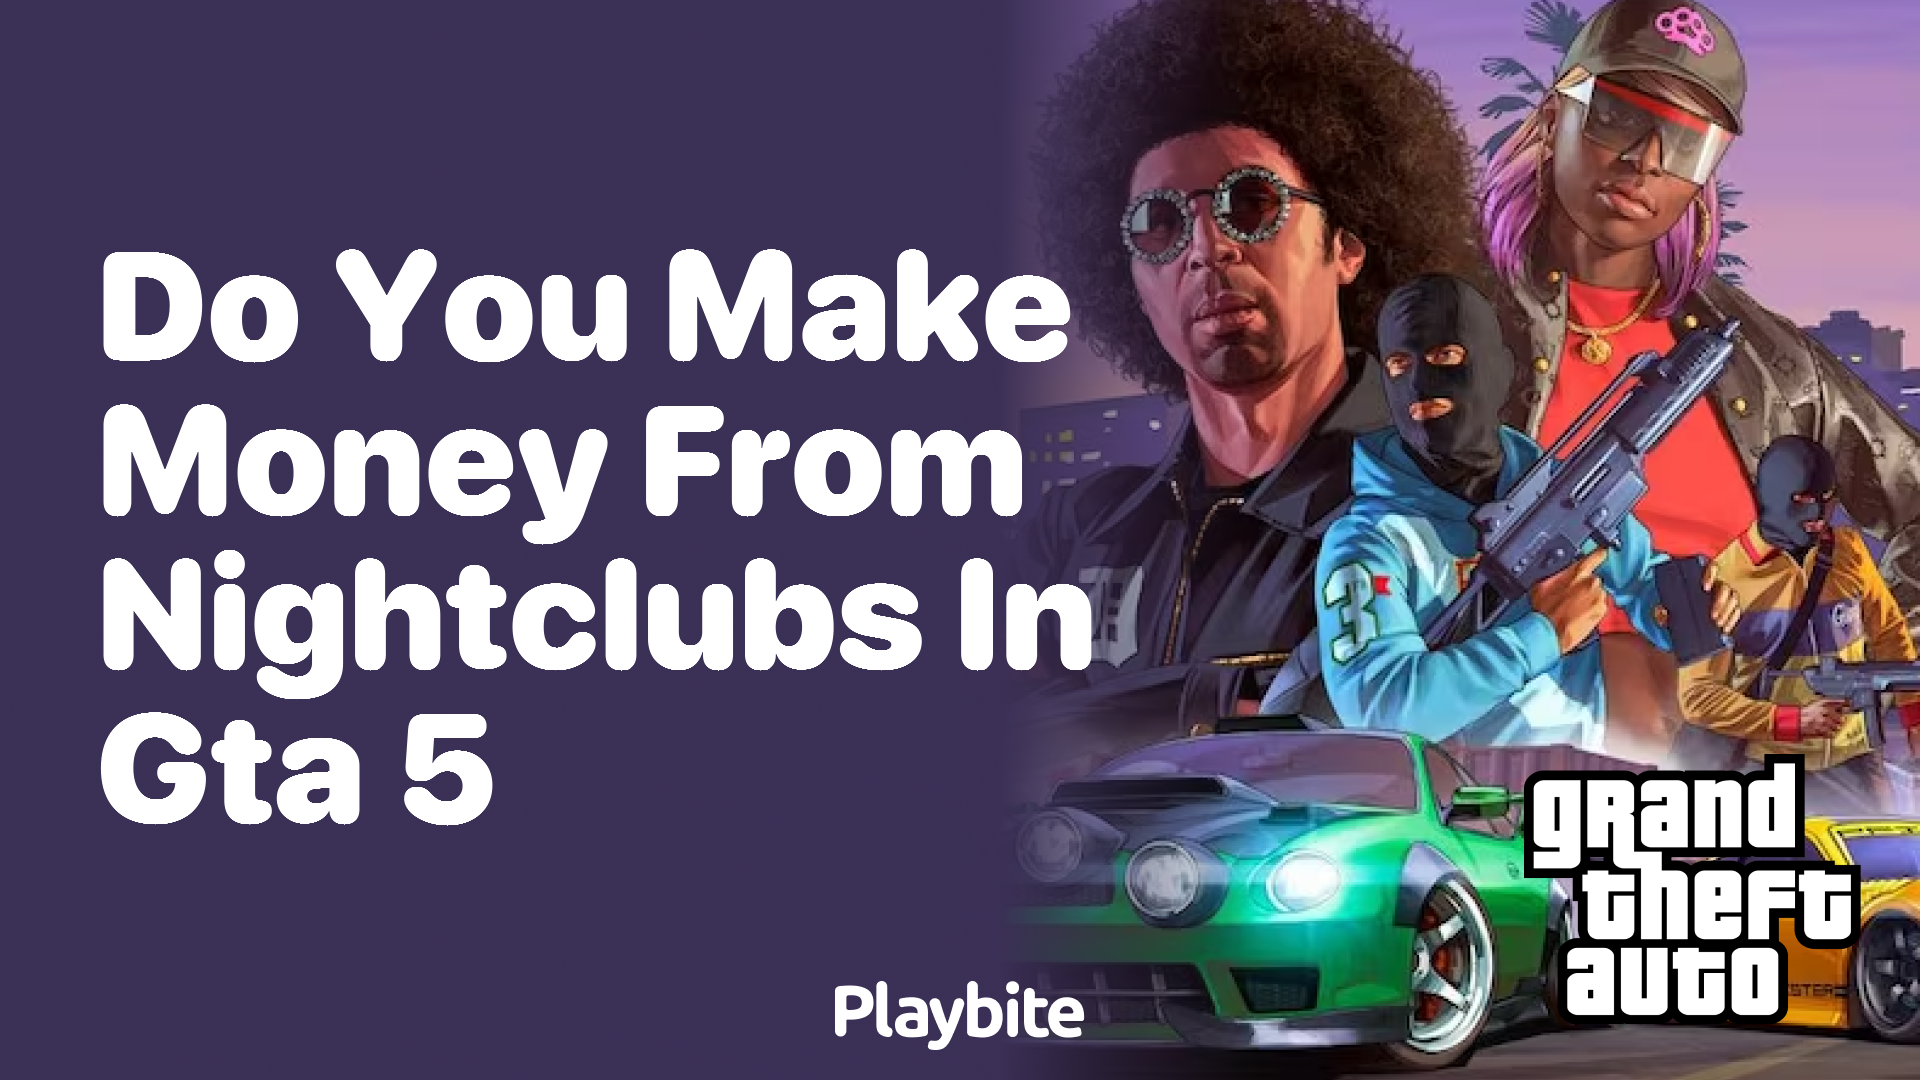 Do you make money from nightclubs in GTA 5?